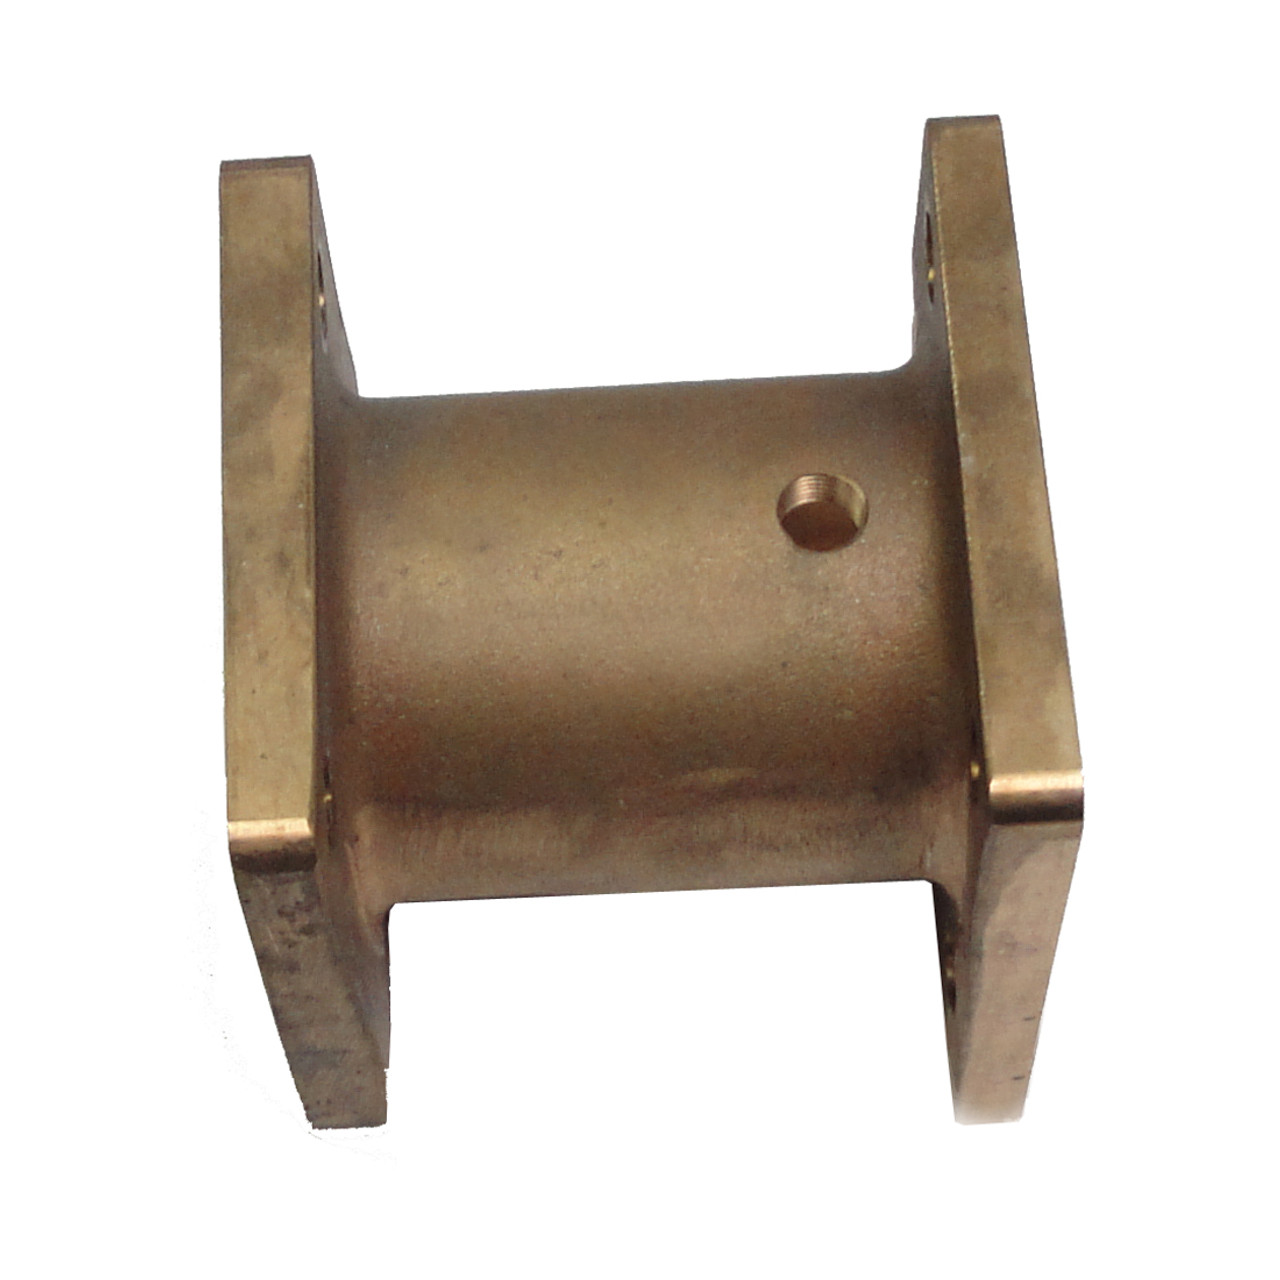 Kolstrand Enclosed Coupling Protector for Nylon & Brass Gurdy